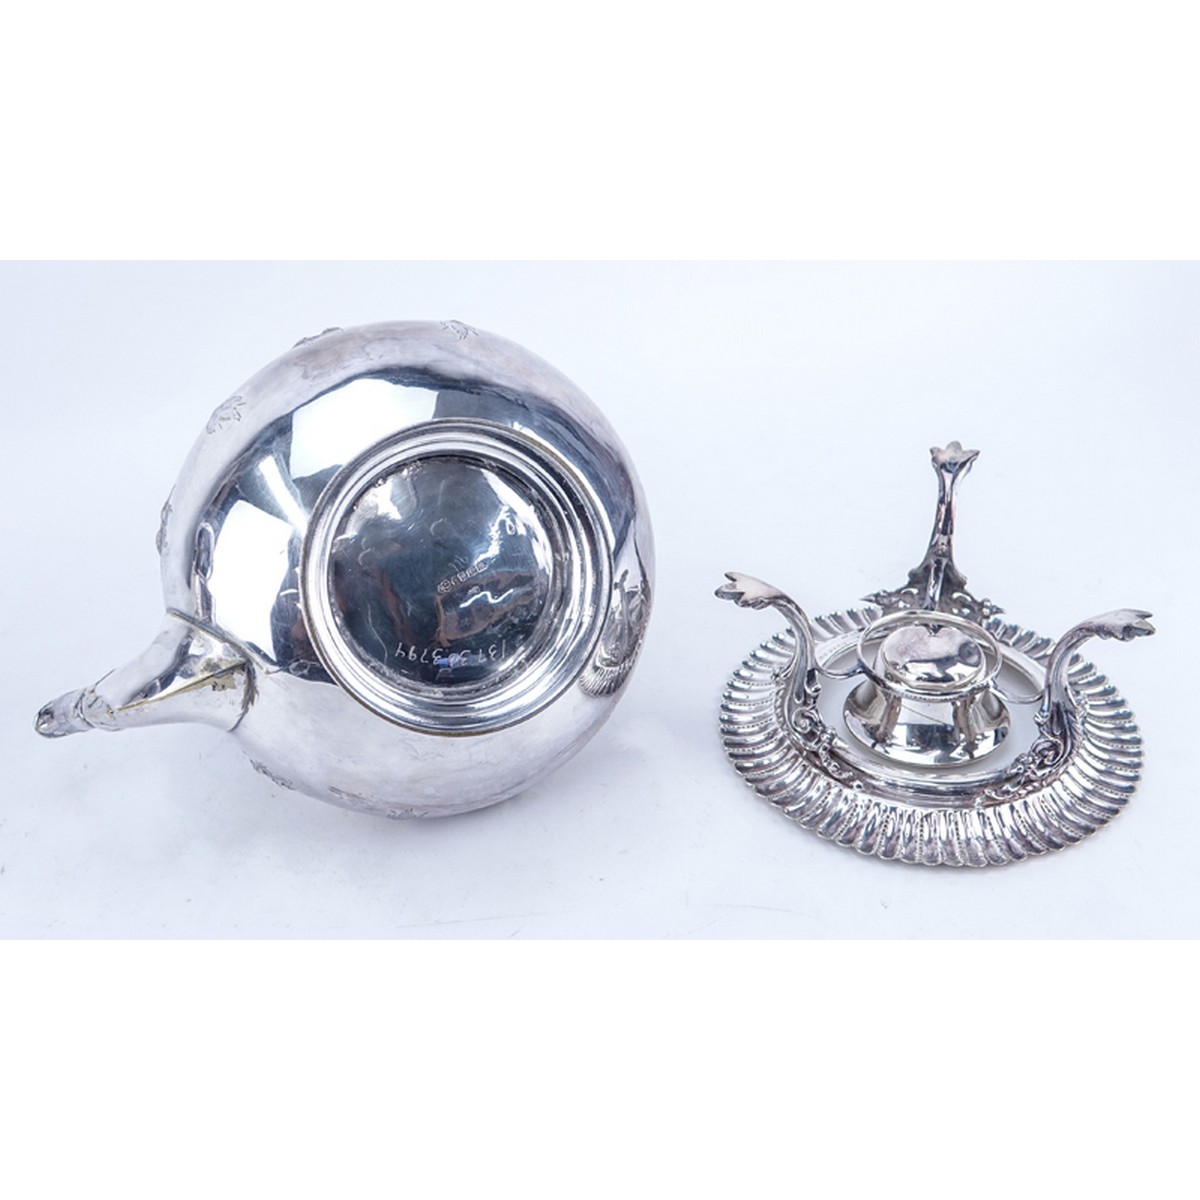 Grouping of Two (2): Philip Ashbury & Sons Sheffield Silver Plate Tea Pot, English Silver Plate Tea Pot with Warming Stand. Each marked on base, English tea pot has hallmarks to base.